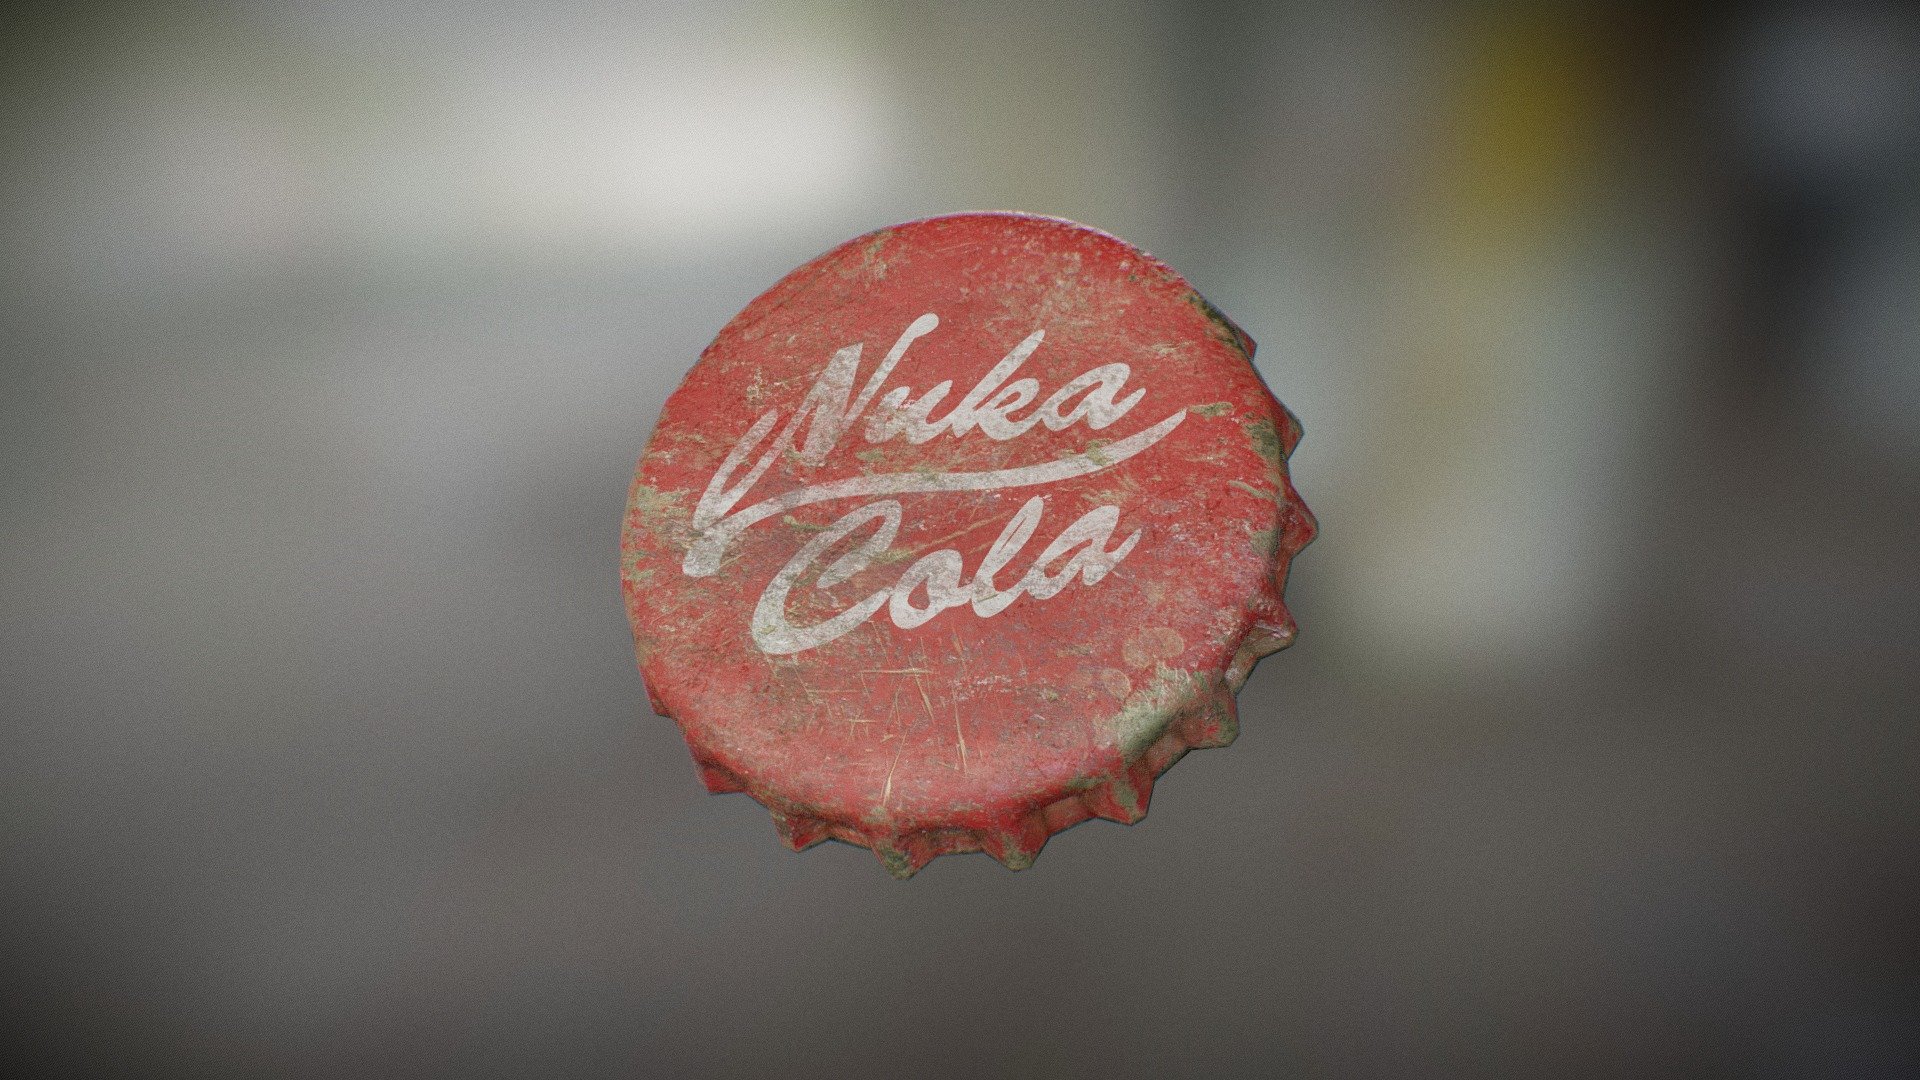 A Nuka Cola Bottle Cap made for fun on the Fallout 4 launch day 3d model